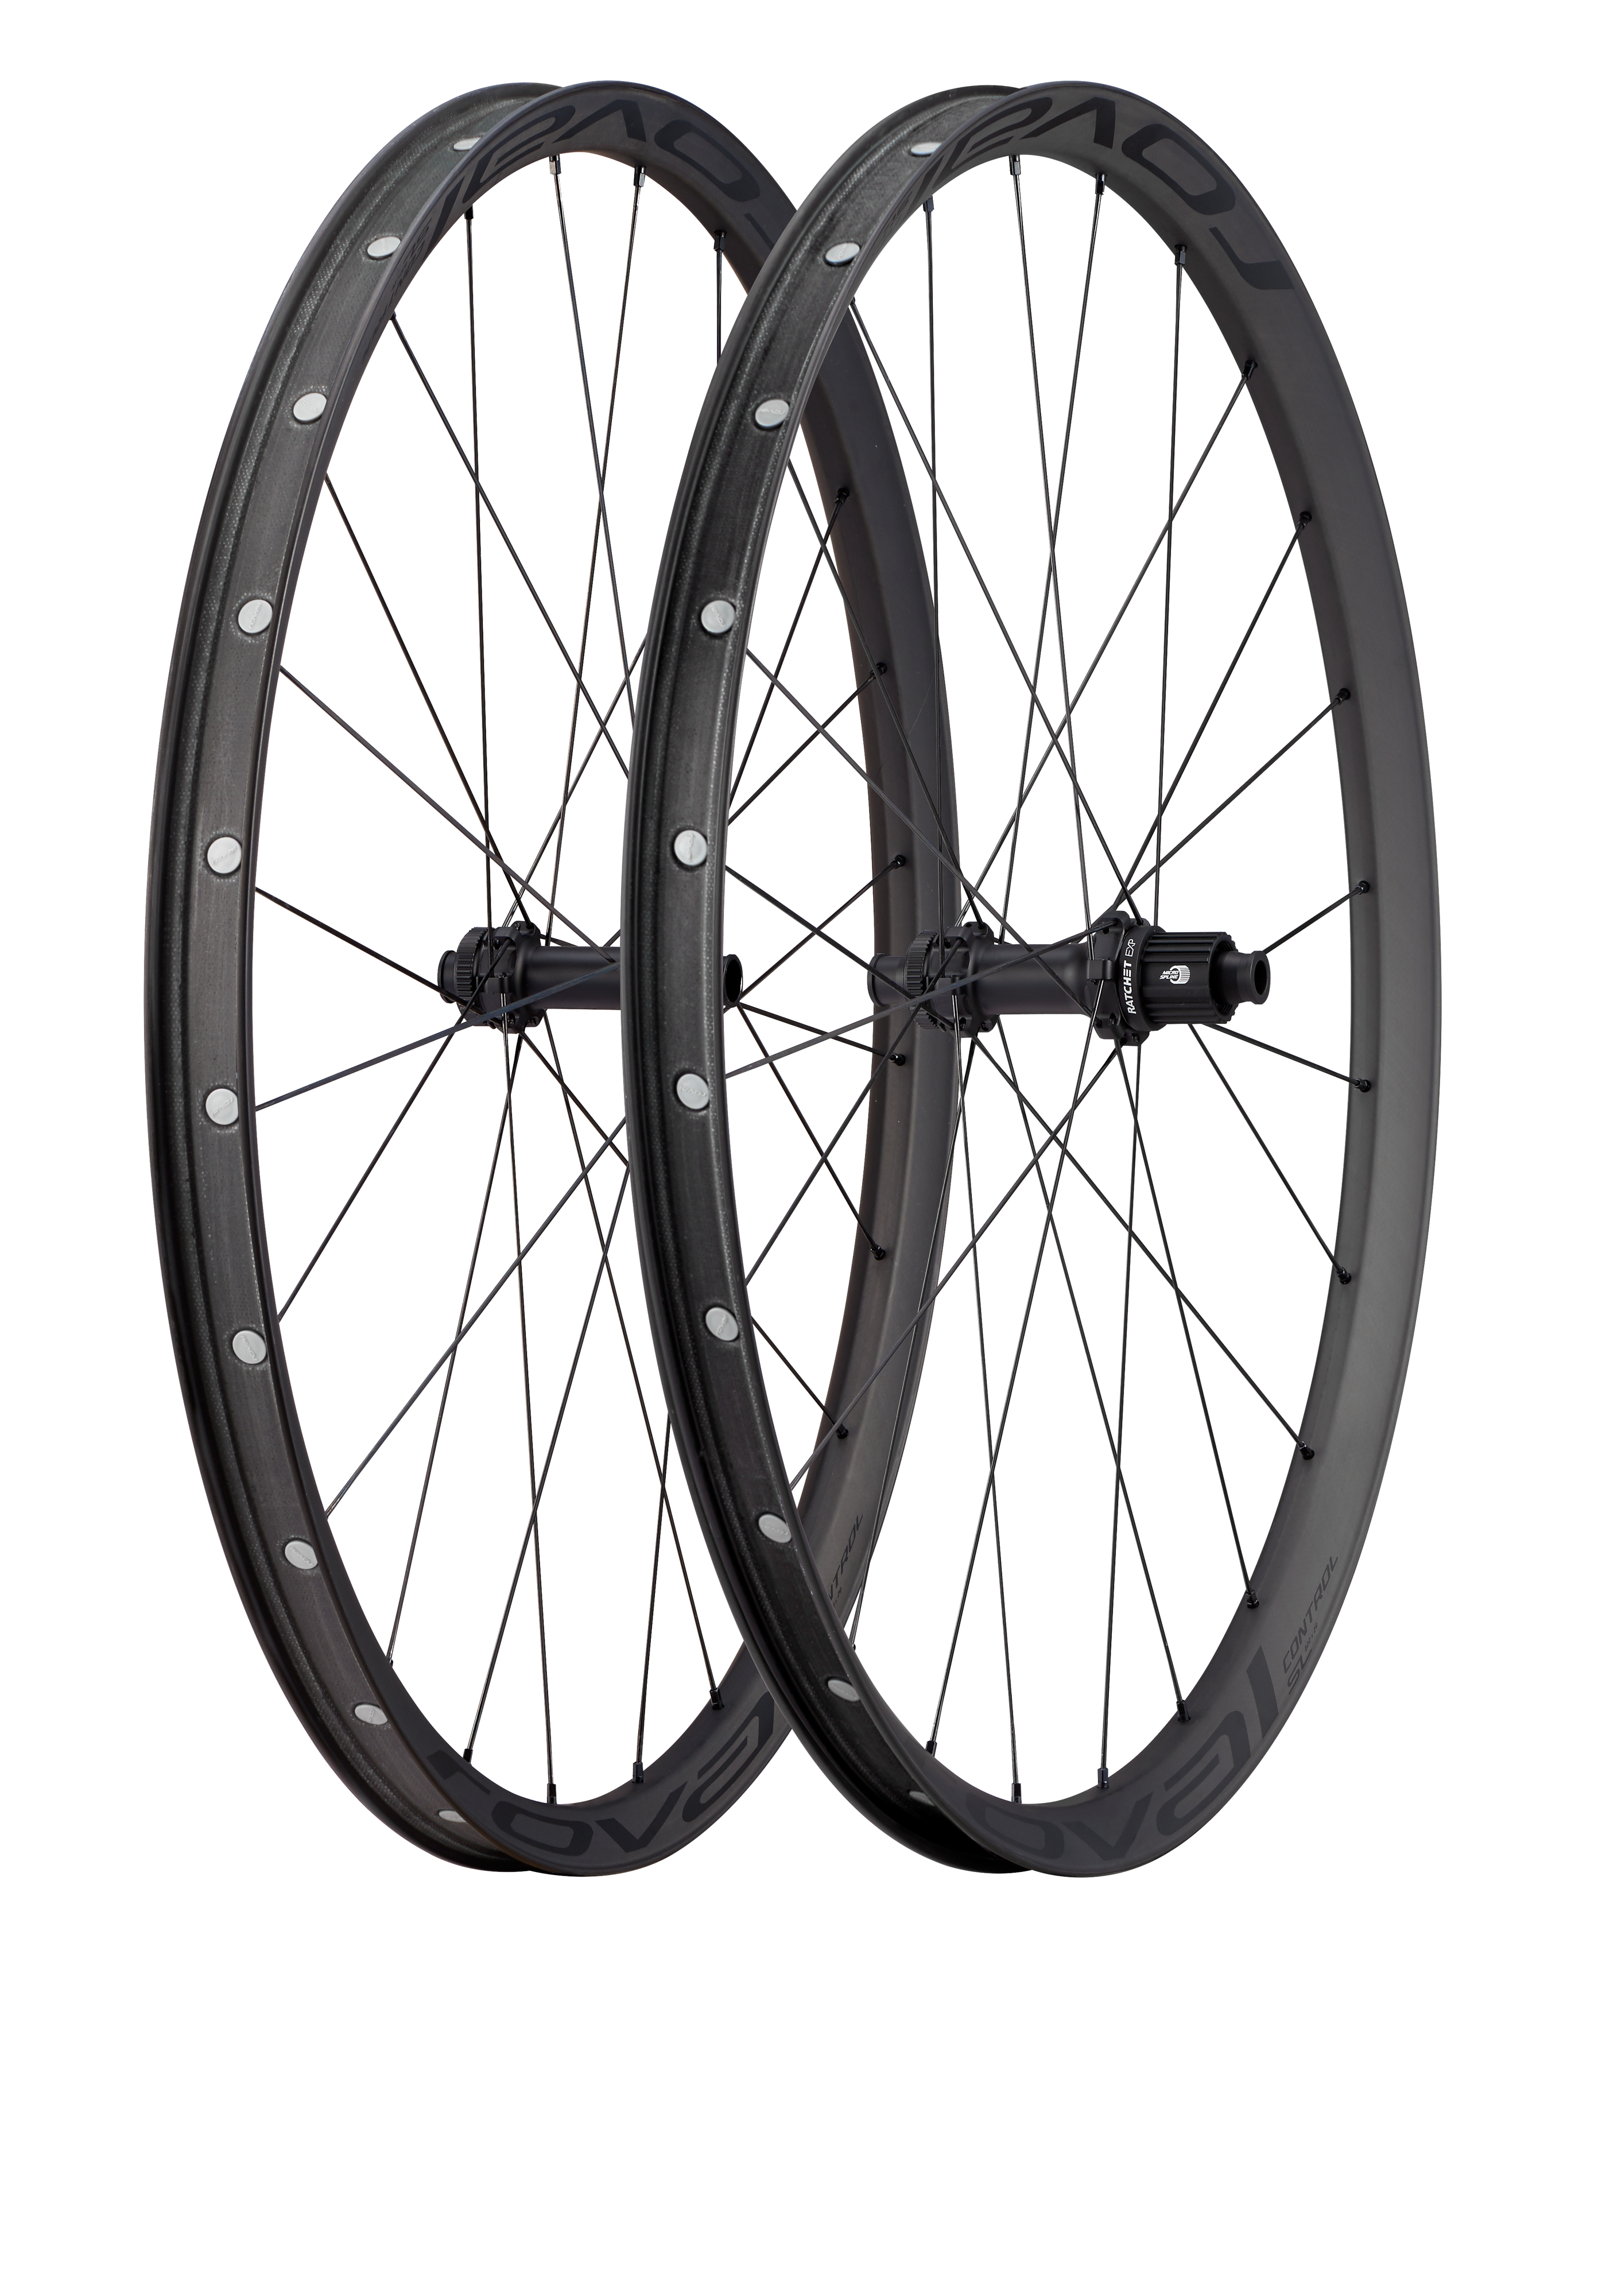 yLy[ΏہzROVAL CONTROL SL 29 CL WHEELSET MS